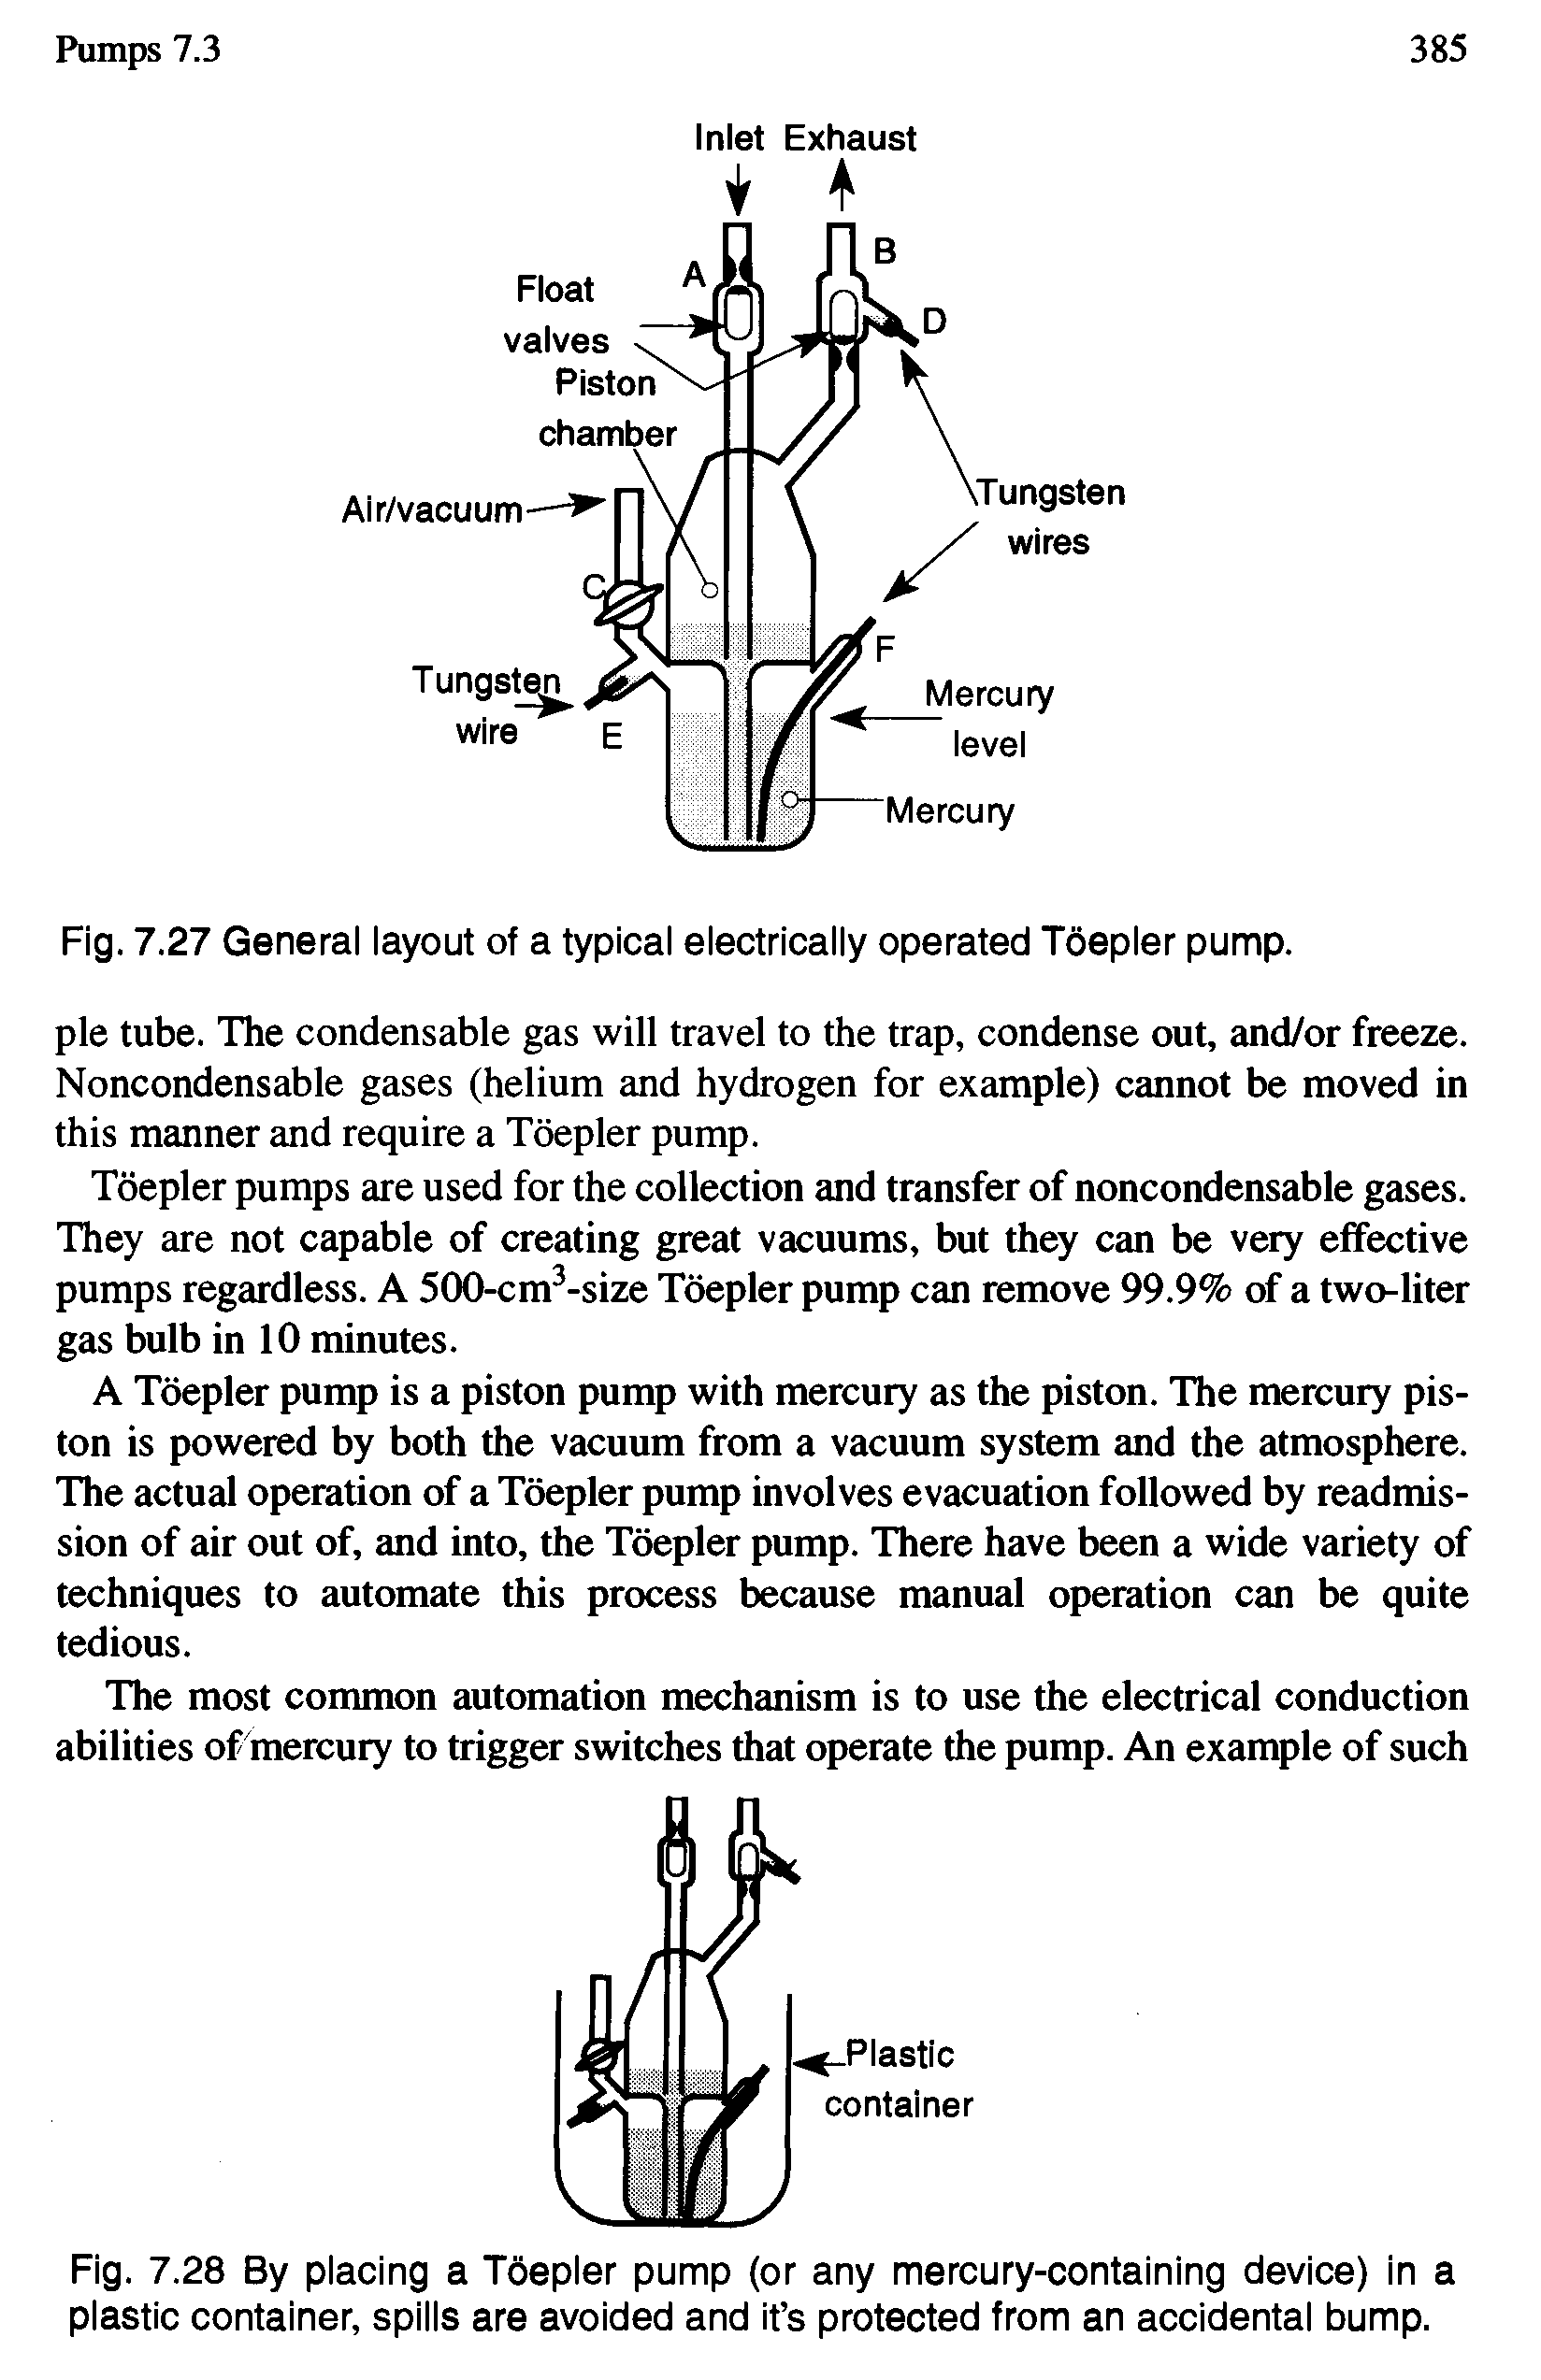 Fig. 7.27 General layout of a typical electrically operated Toepler pump.